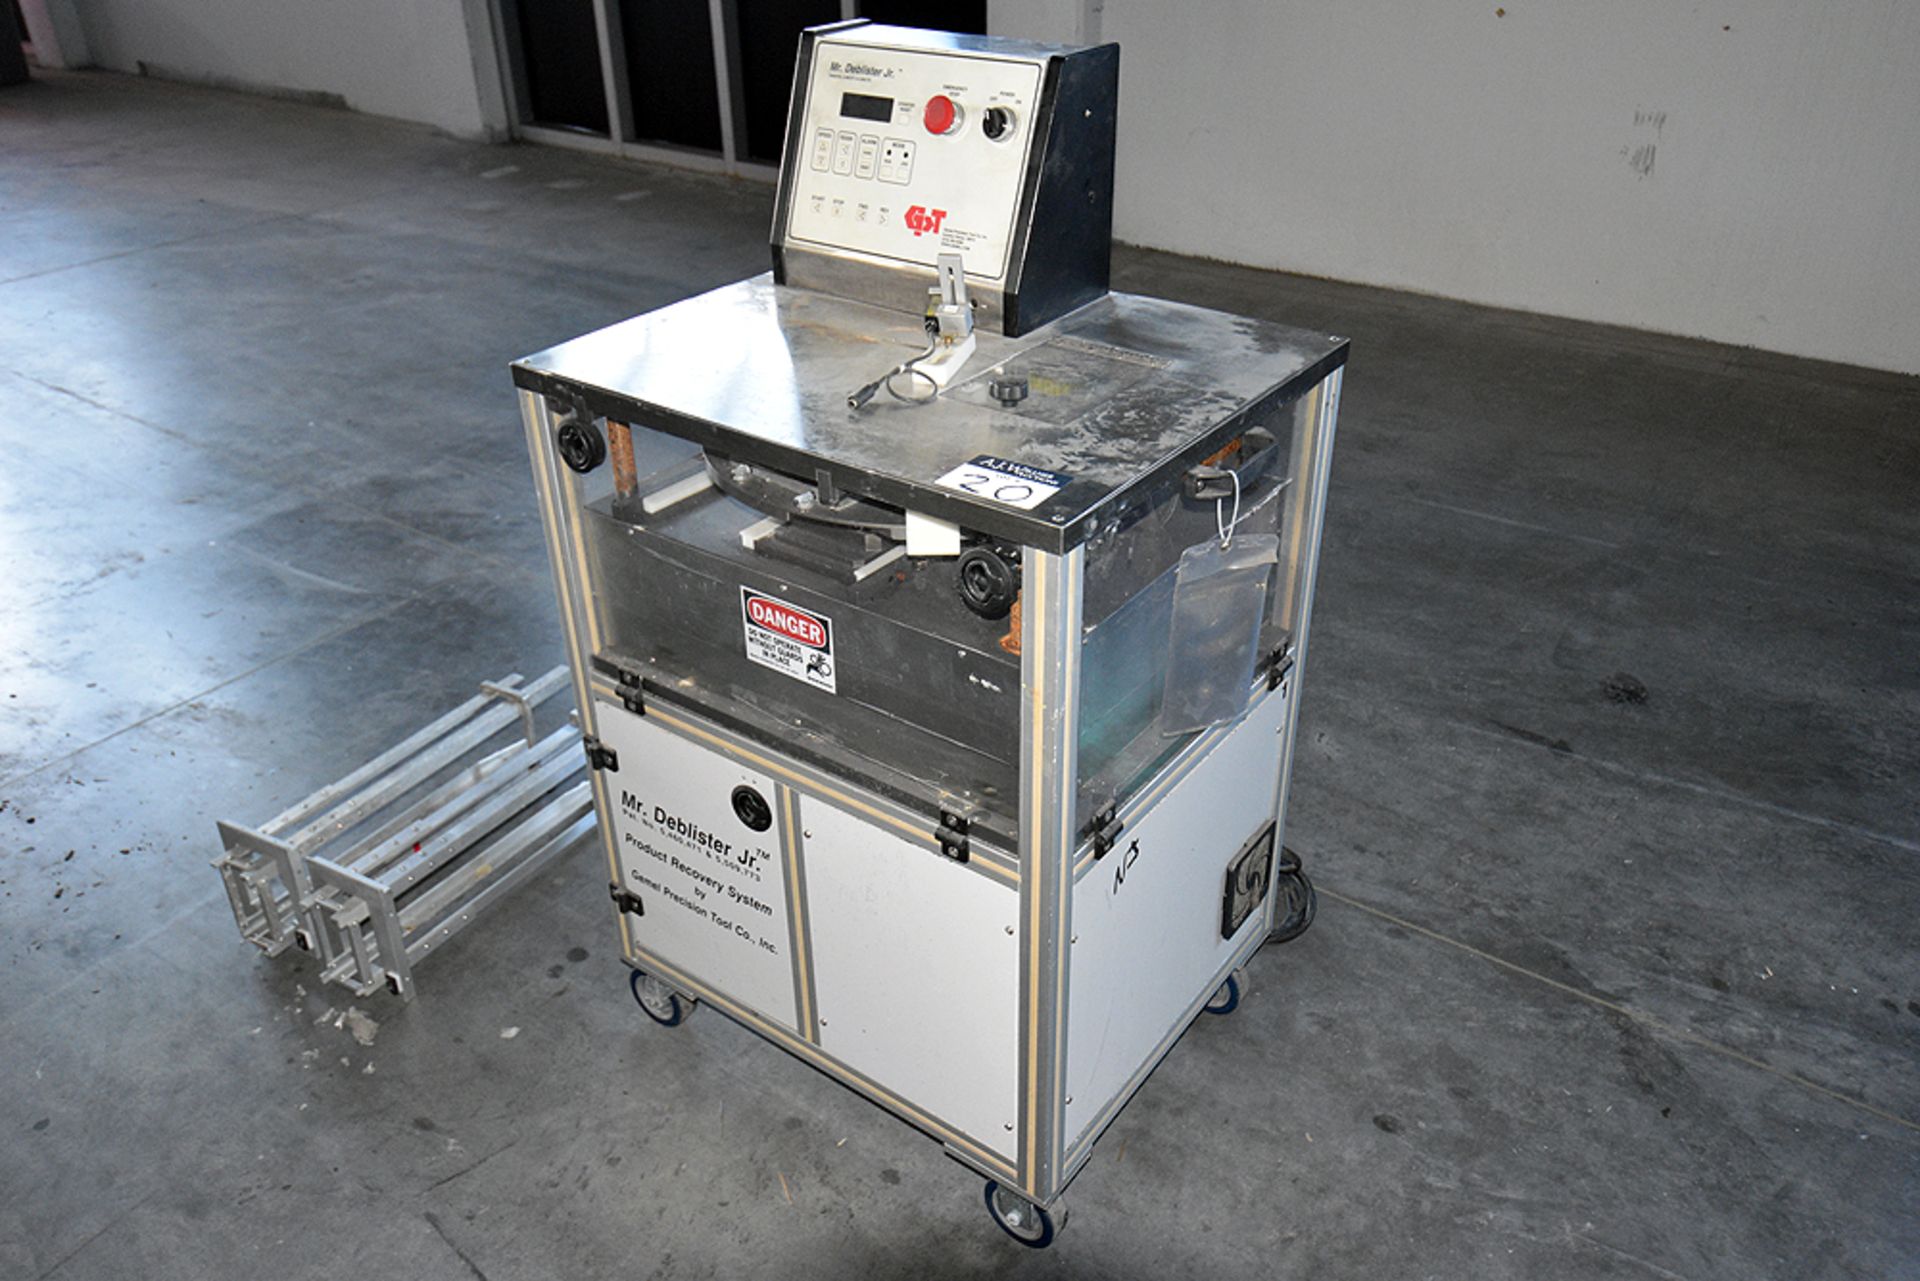 Gemel Precision "Mr. Deblister Jr." Product Recovery System